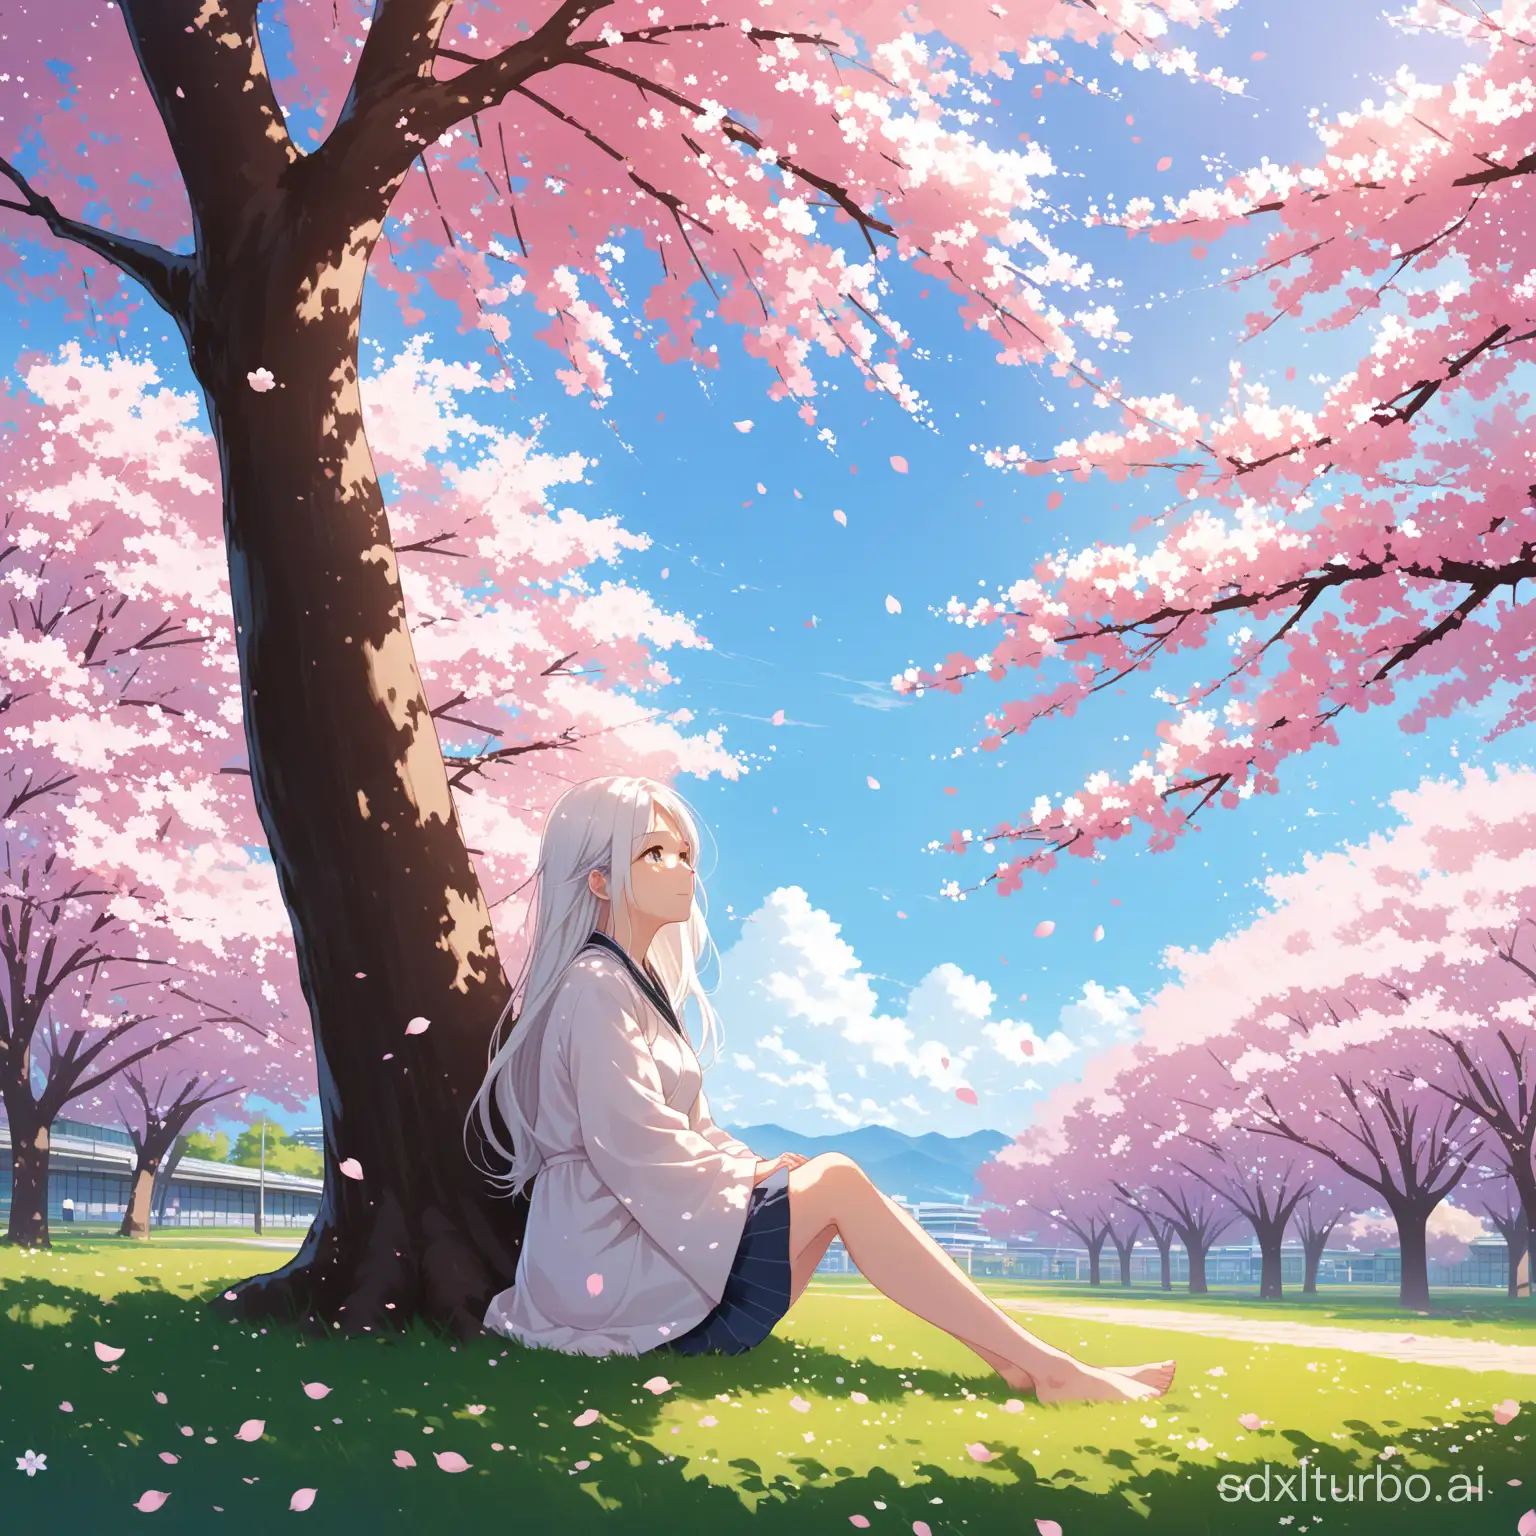 In the campus, a long-haired and white-haired girl sits under a cherry blossom tree. She is about 1.7 meters tall, quietly sitting under the cherry blossom tree. With the wind blowing, petals scatter in the air. It's a early summer afternoon, and the distant sky is very clear.